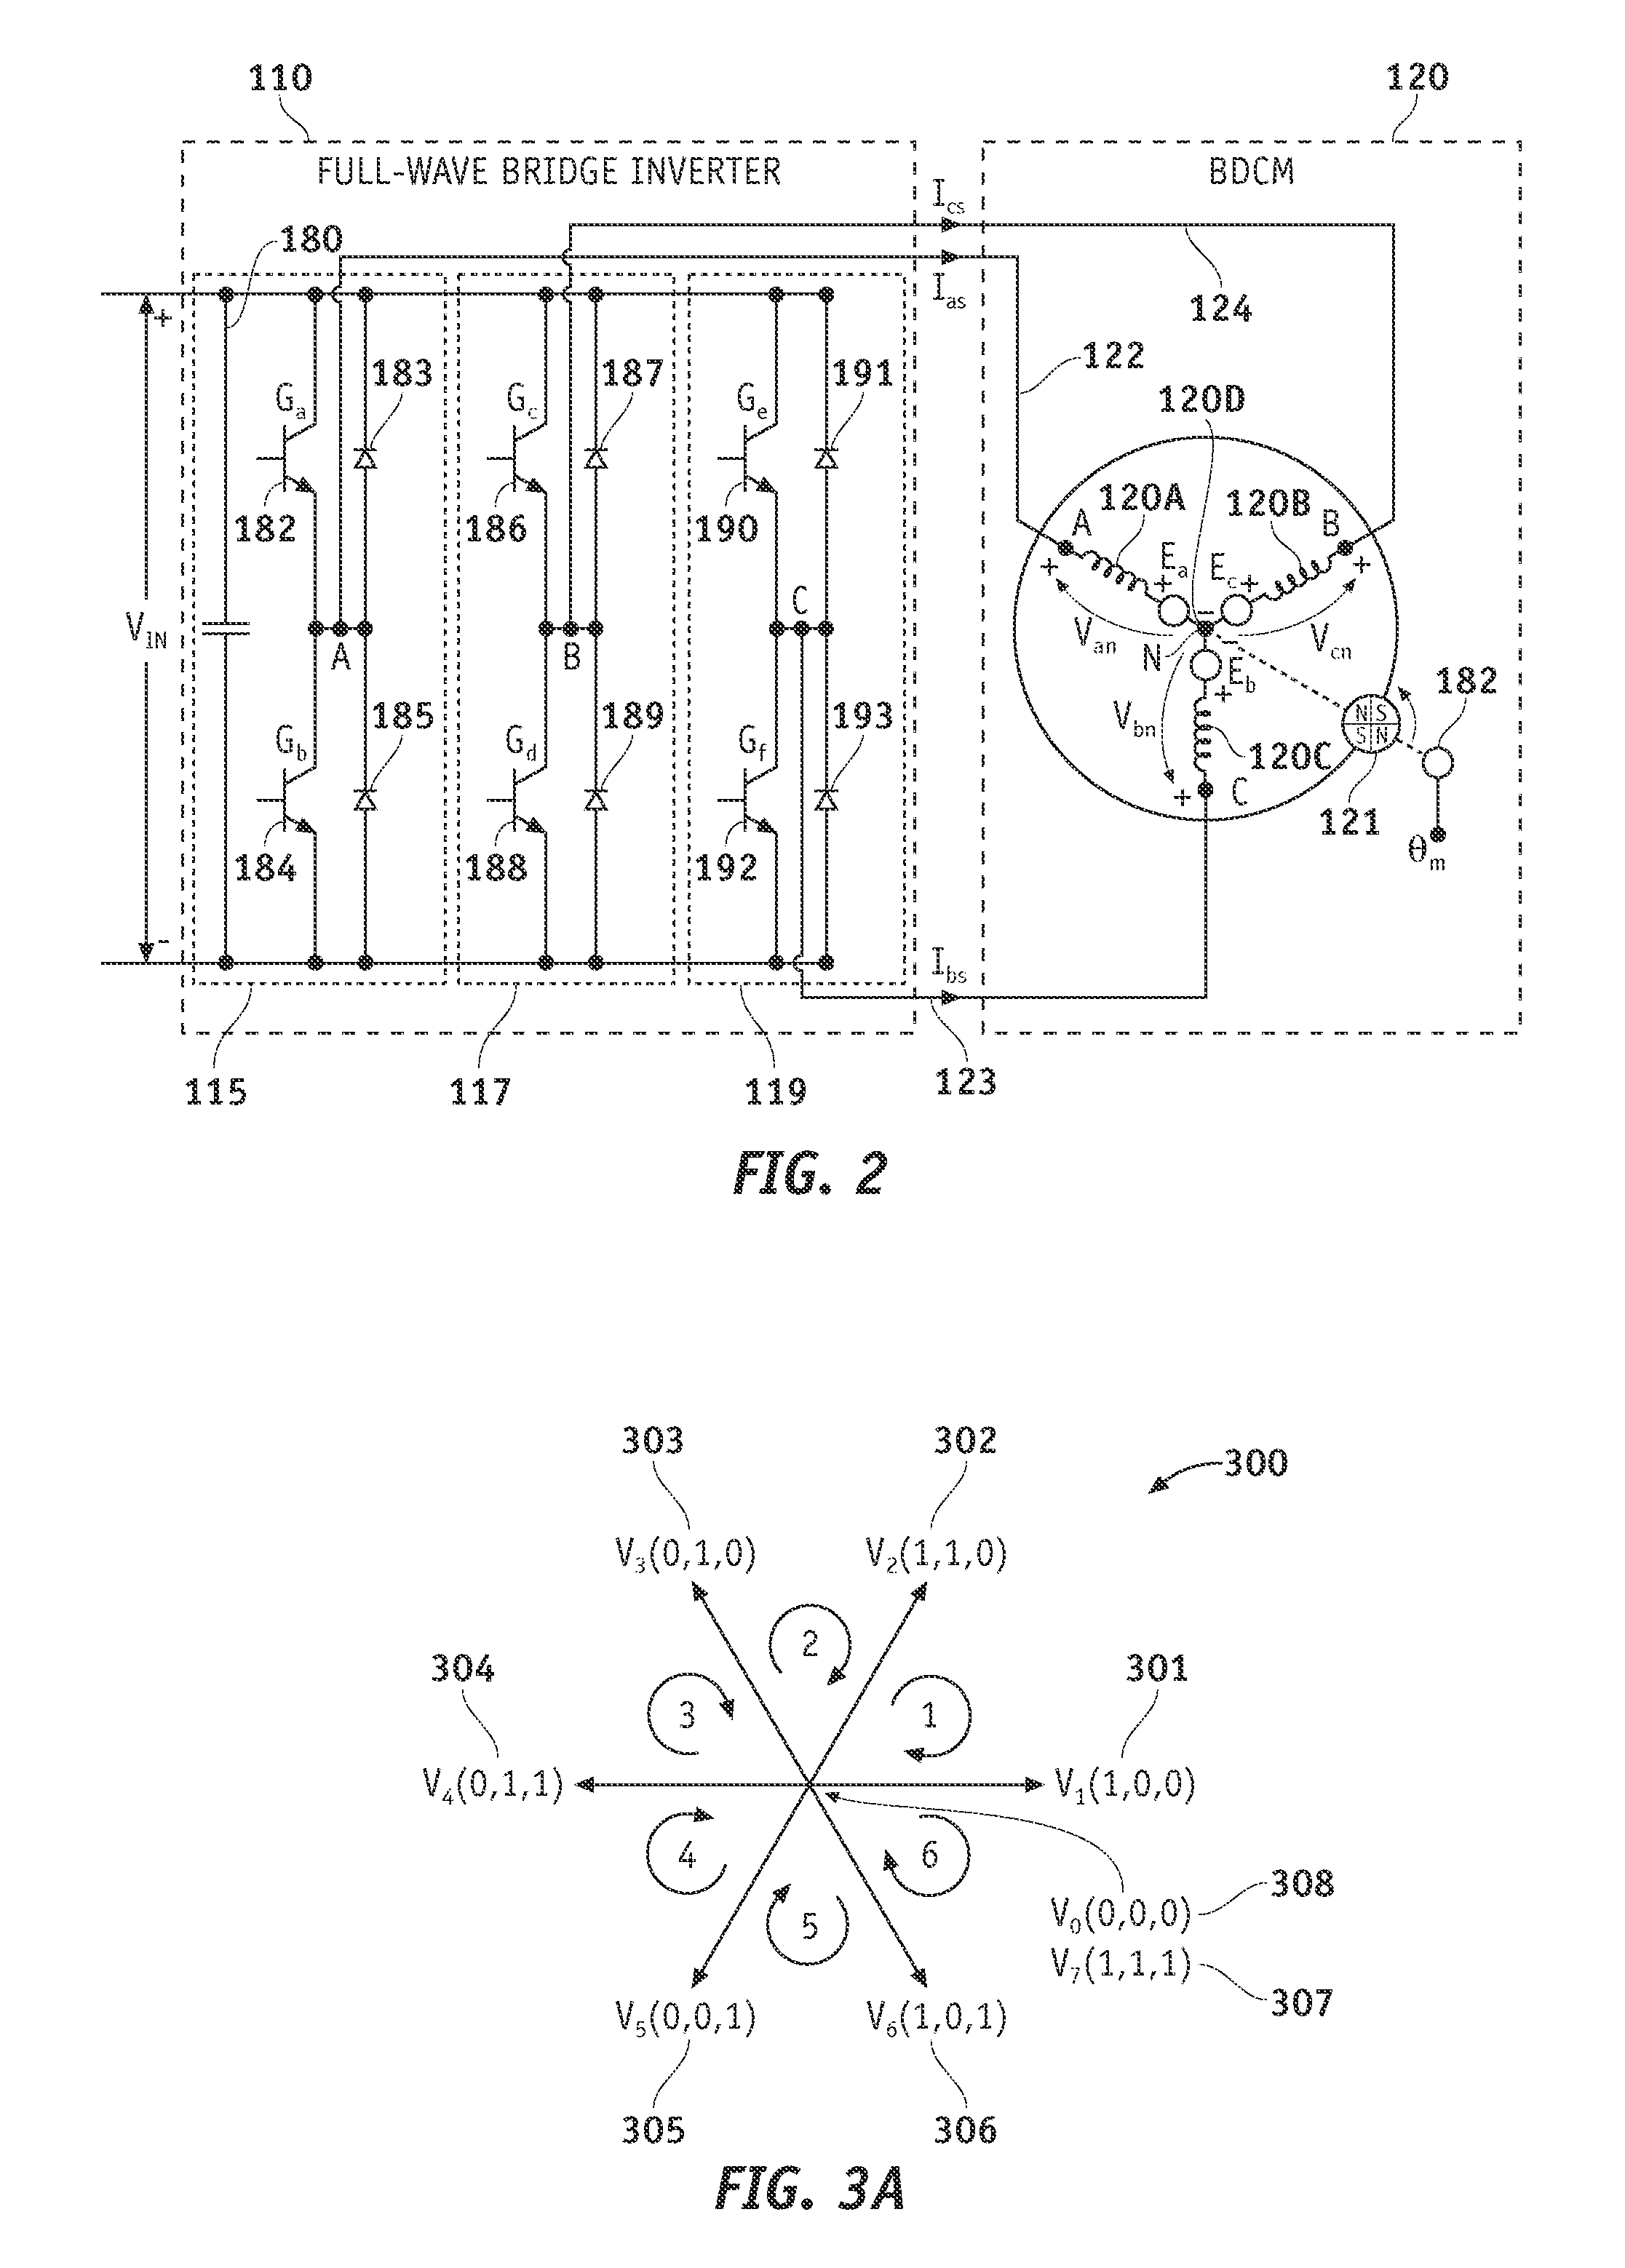 Methods, systems and apparatus for sensorless rotor angular position estimation implementing reduced switching loss pulse width modulated (PWM) waveforms